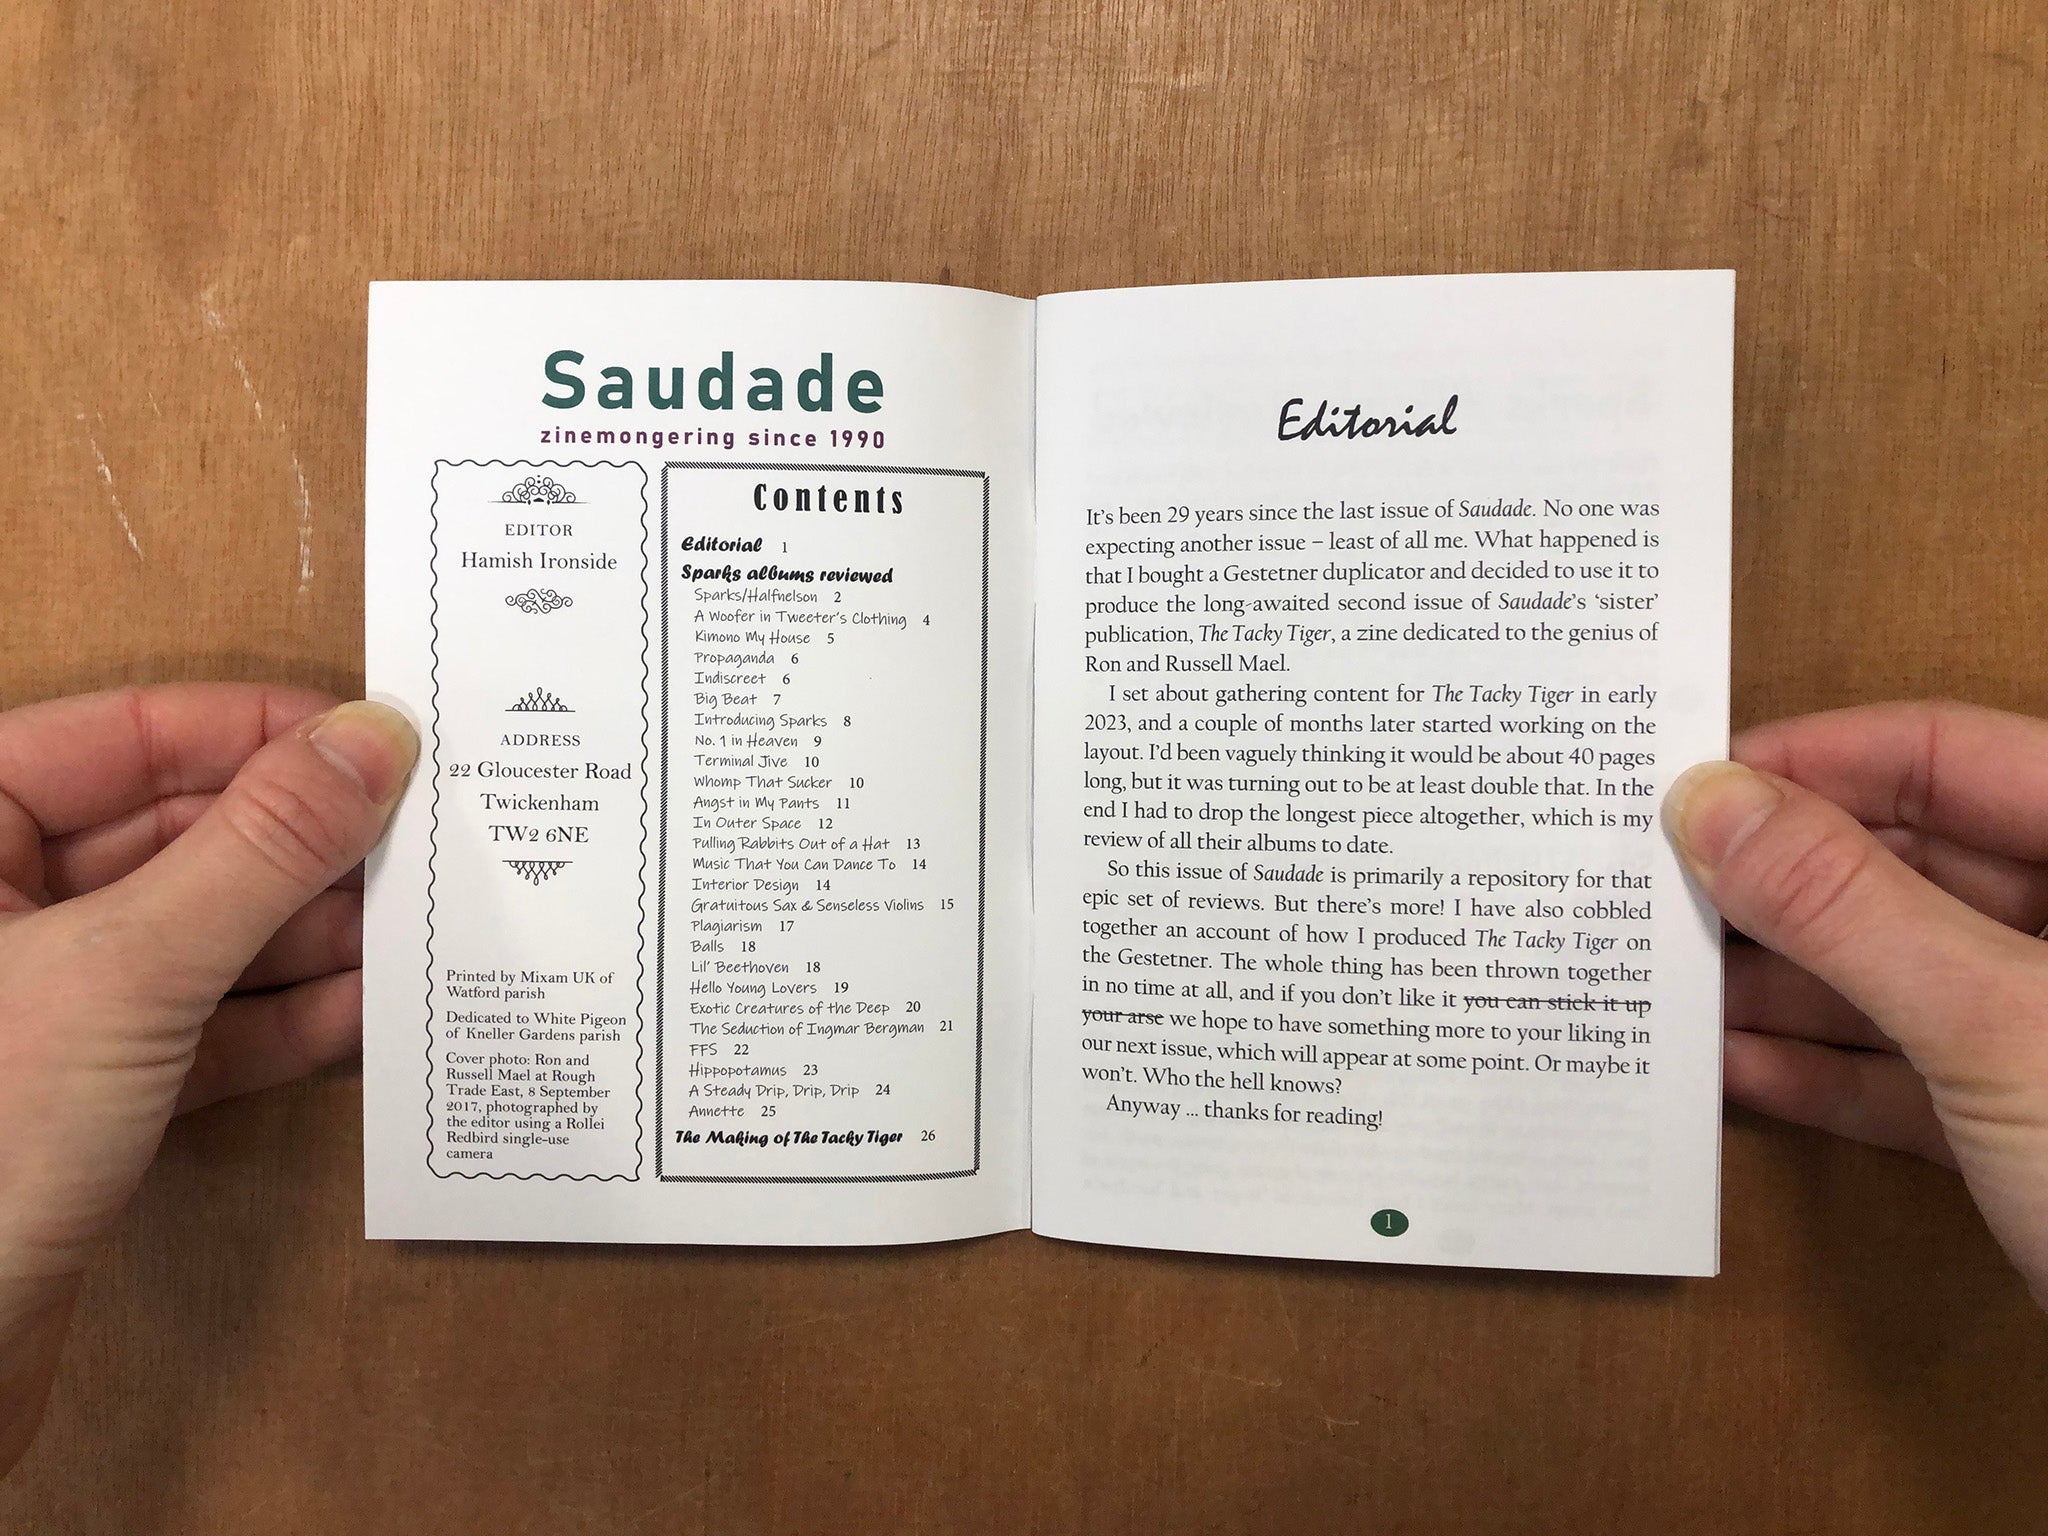 SAUDADE ISSUE 6: SPECIAL SPARKS ISSUE! Edited by Hamish Ironside